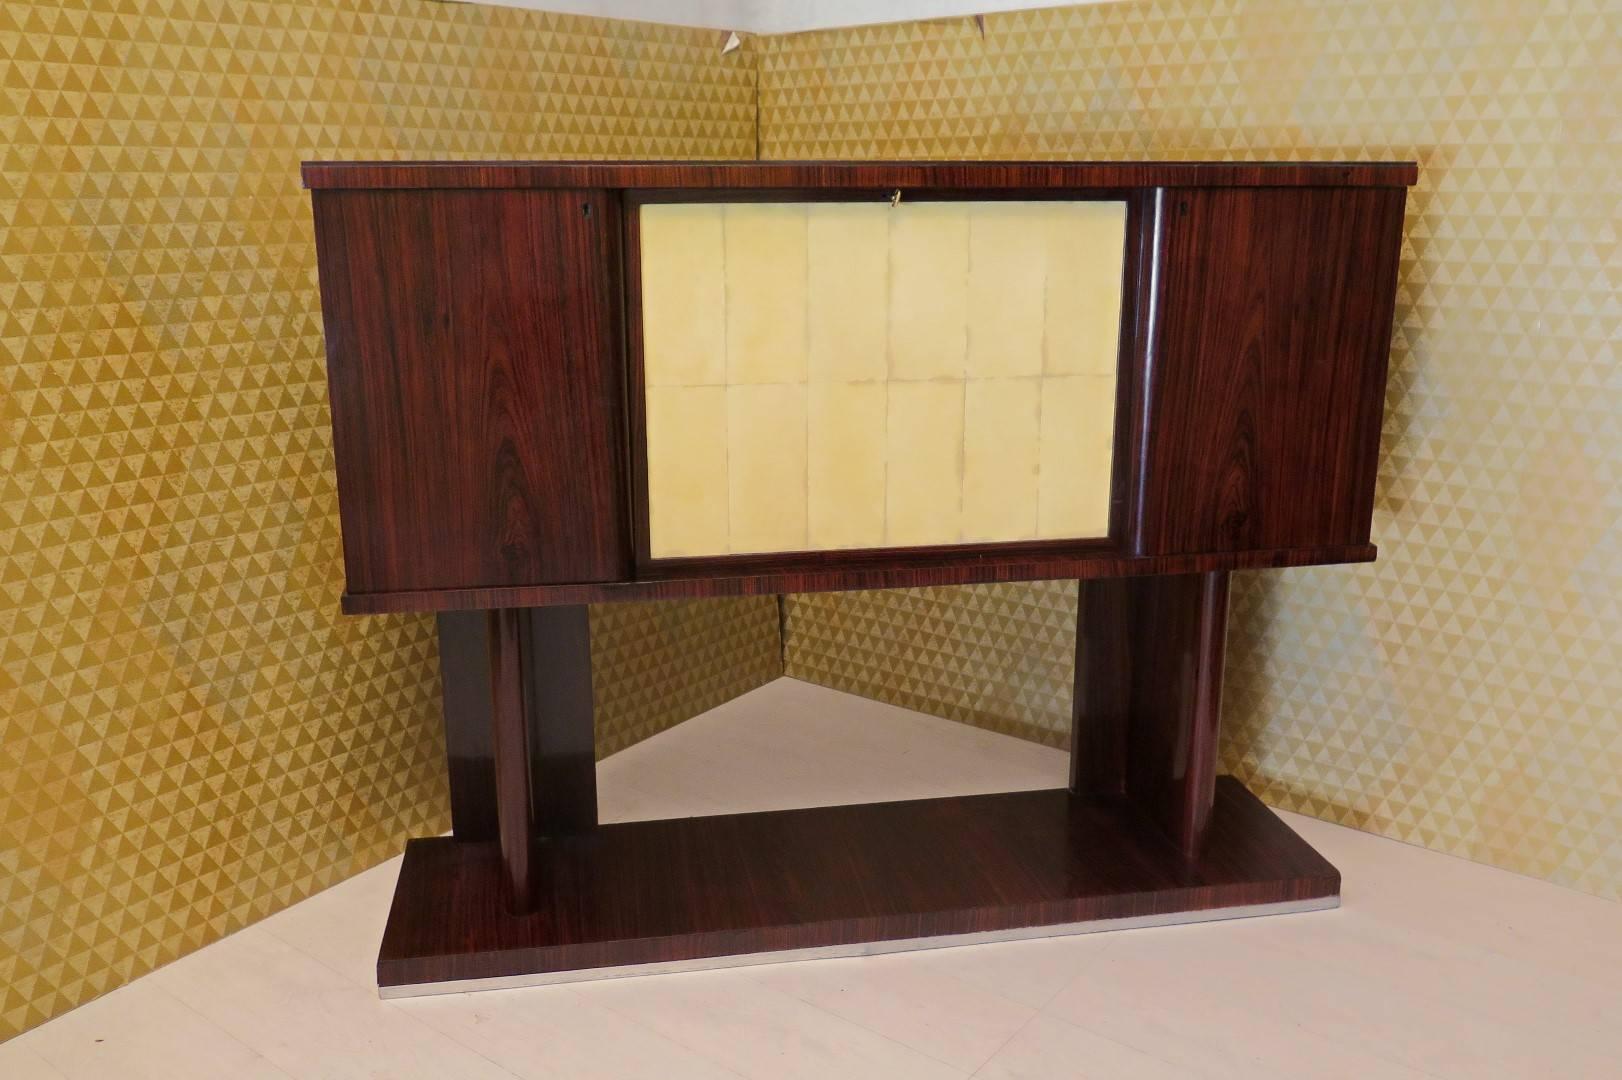 Dry bar in rosewood veneer, with central door in parchment and glass top red bordò, internally lined everything in mirror with glass shelves and wood.
Very very beautiful piece of furniture and have much effect.